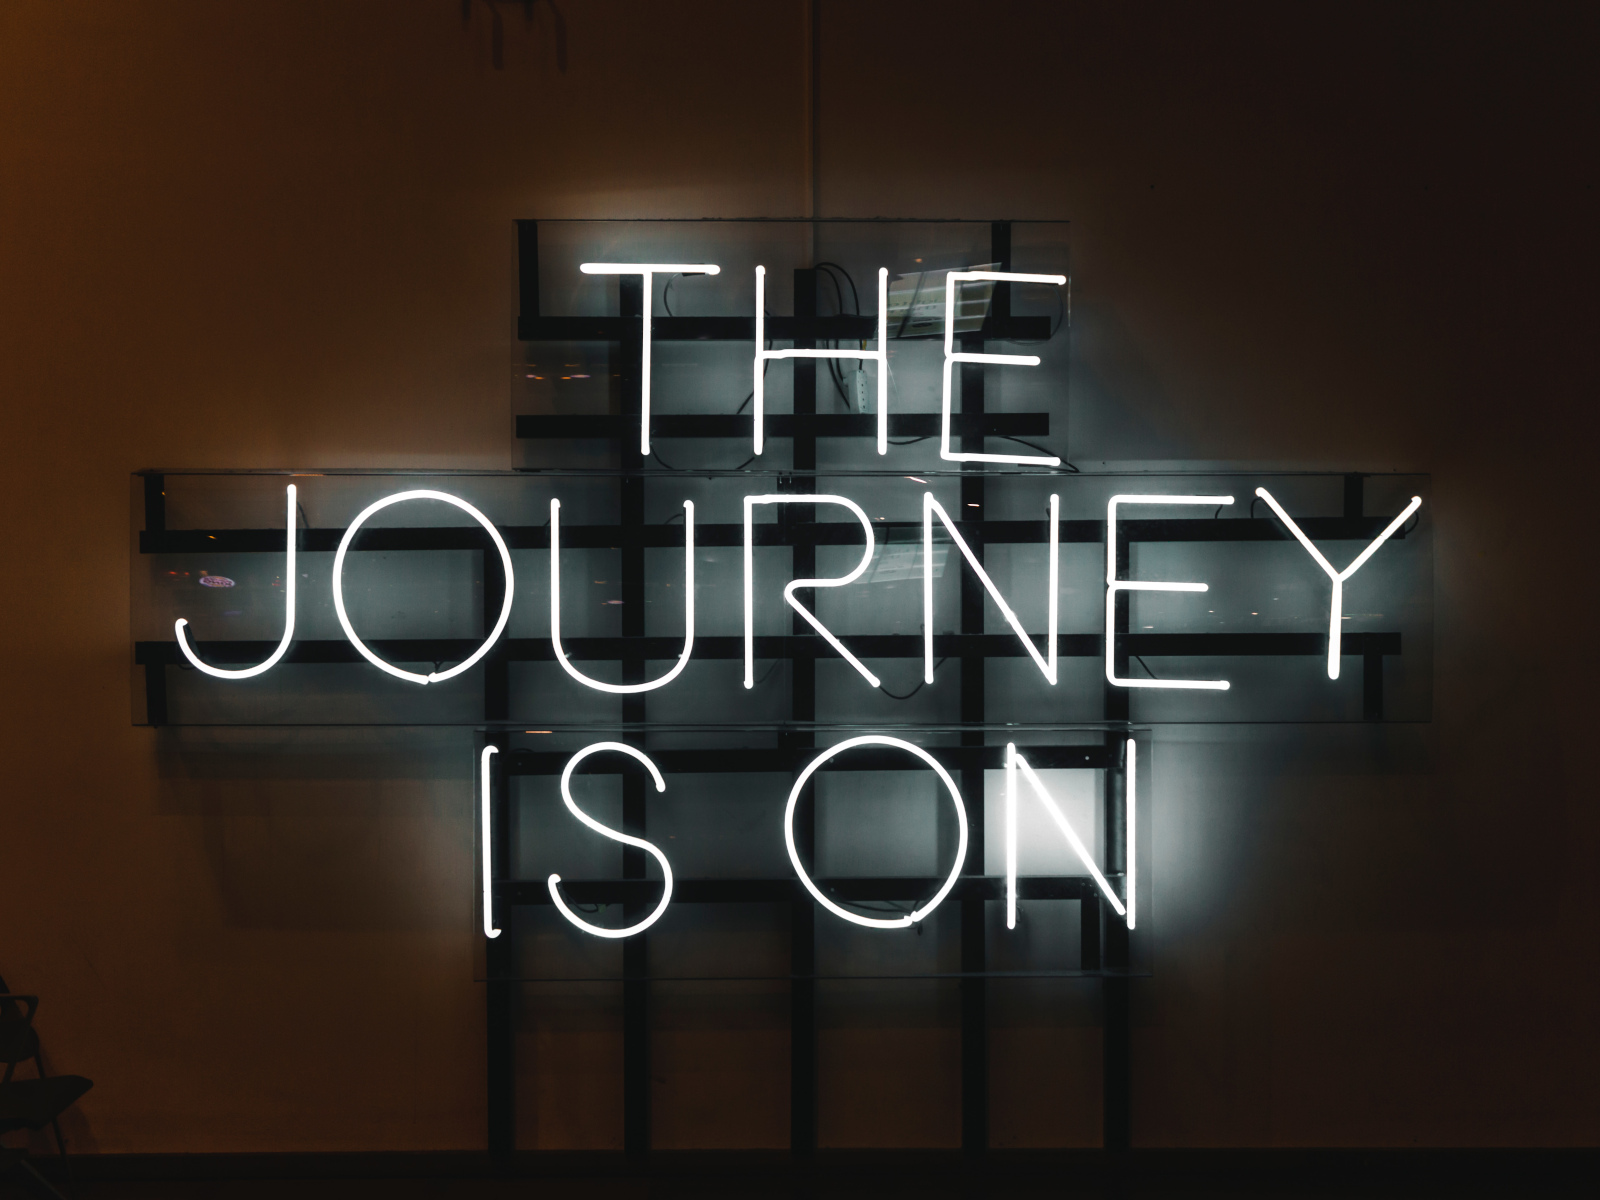 Neon lights spelling 'The Journey Is On'